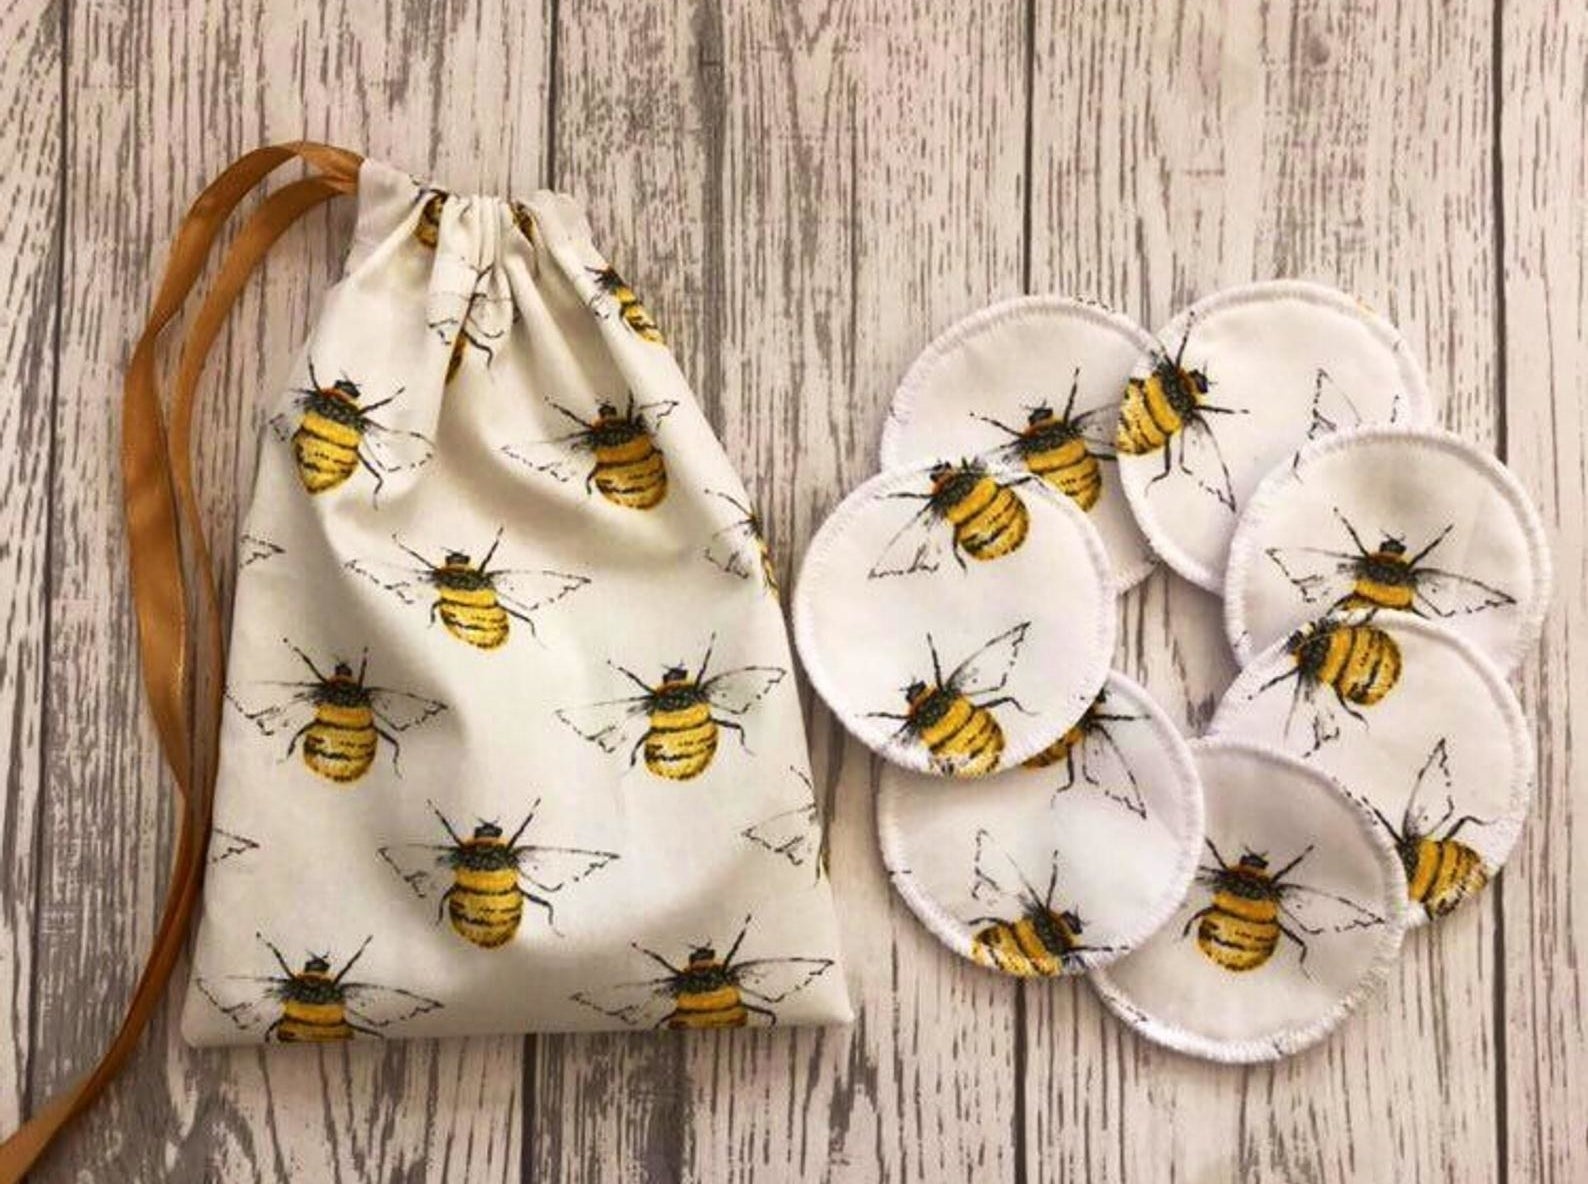 A set of seven round pads and a drawstring bag made with a beige fabric with illustrations of bees all over them